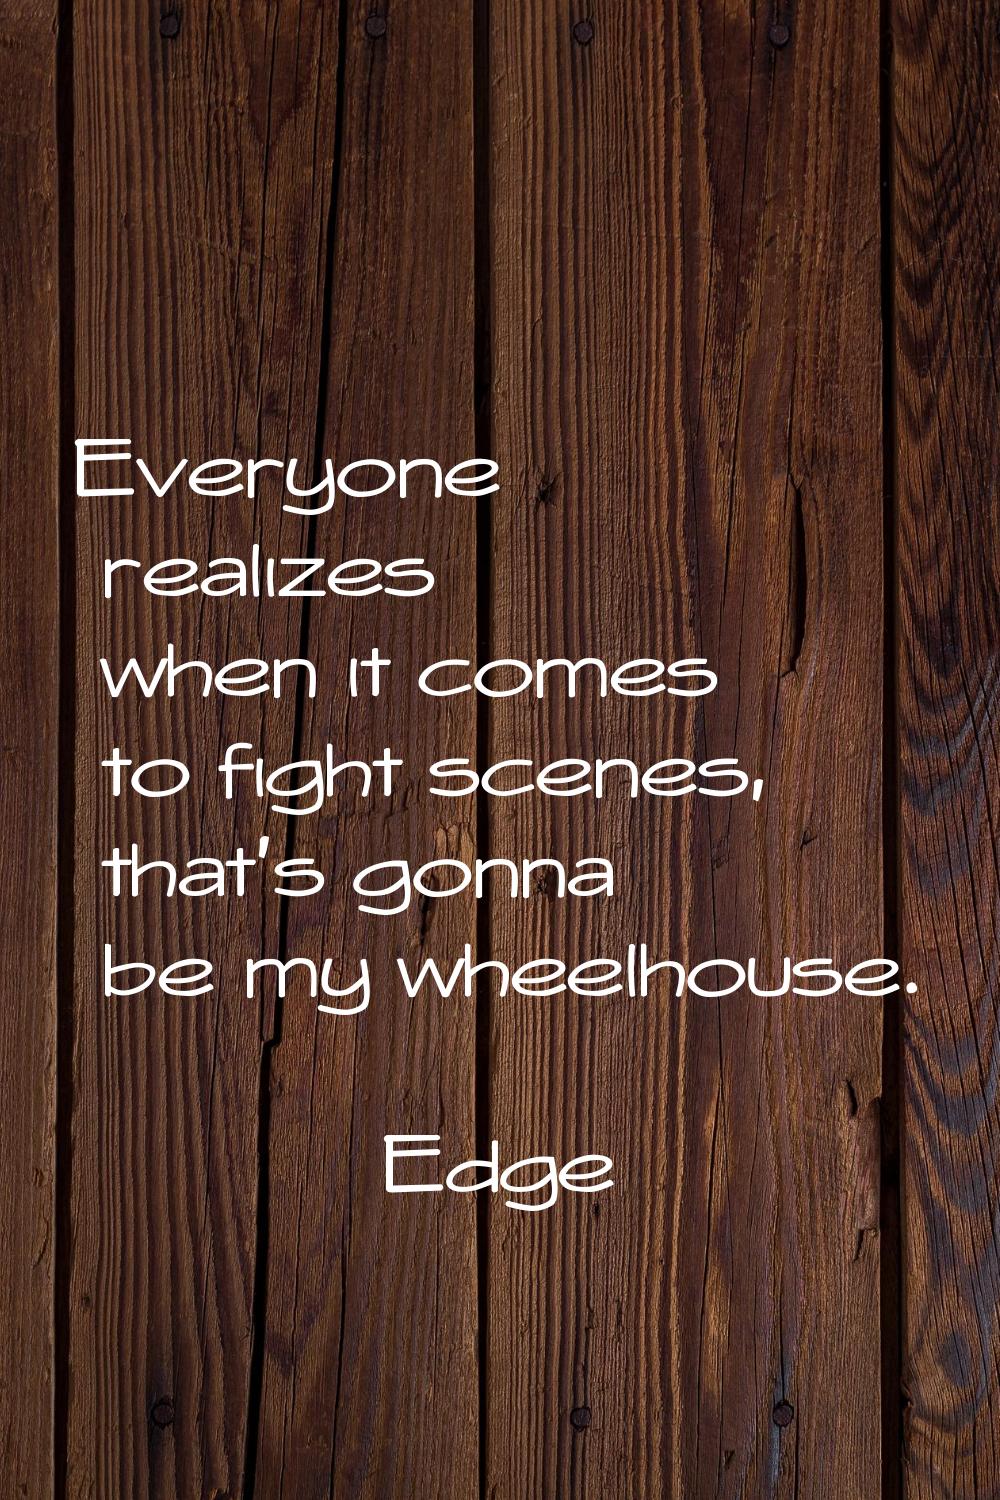 Everyone realizes when it comes to fight scenes, that's gonna be my wheelhouse.